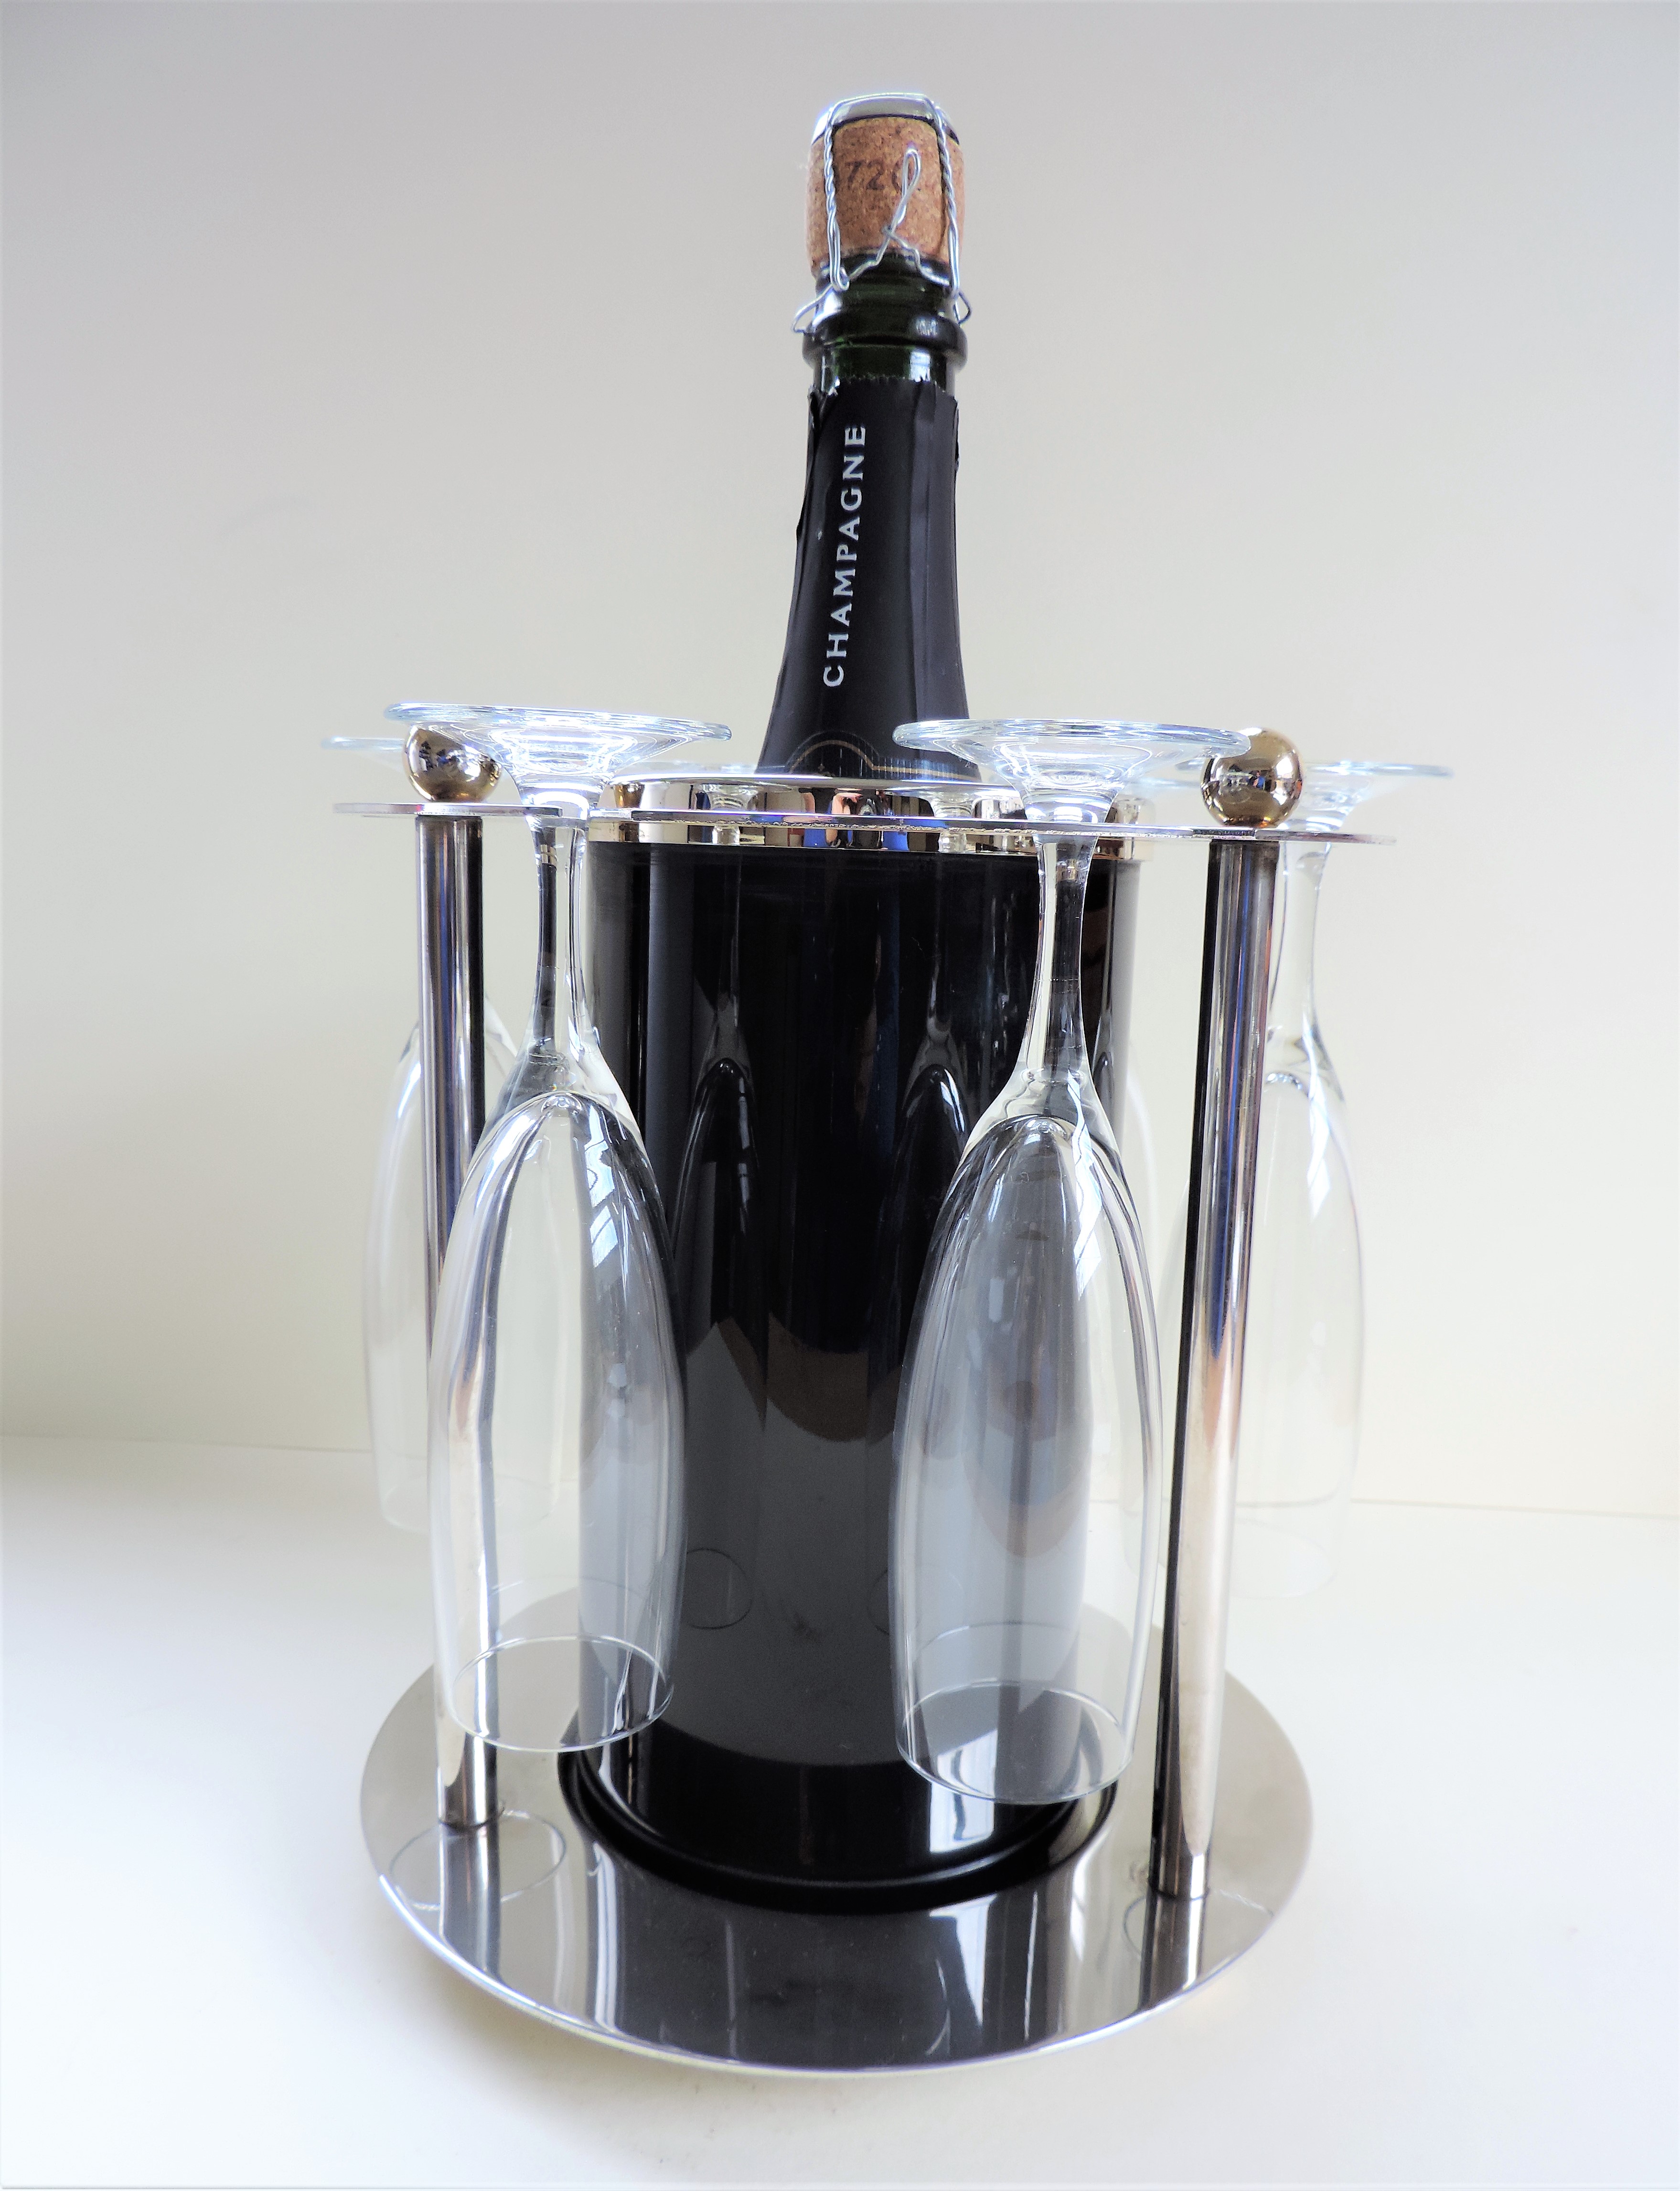 Novelty French Modernist Champagne Cooler, circa 1970's - Image 4 of 11